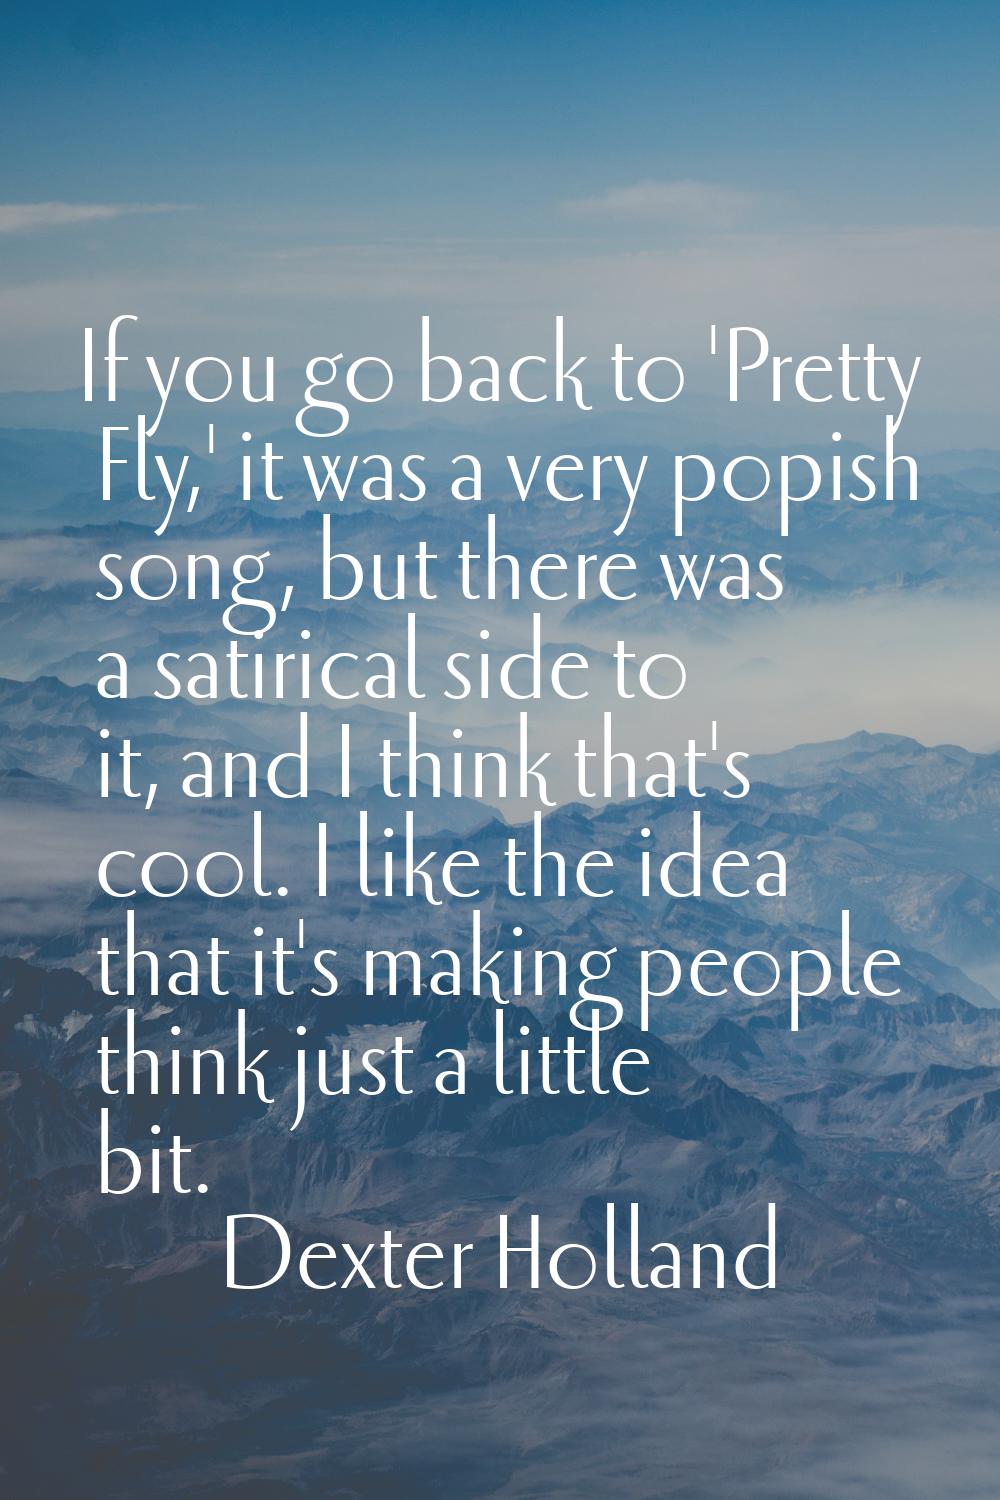 If you go back to 'Pretty Fly,' it was a very popish song, but there was a satirical side to it, an